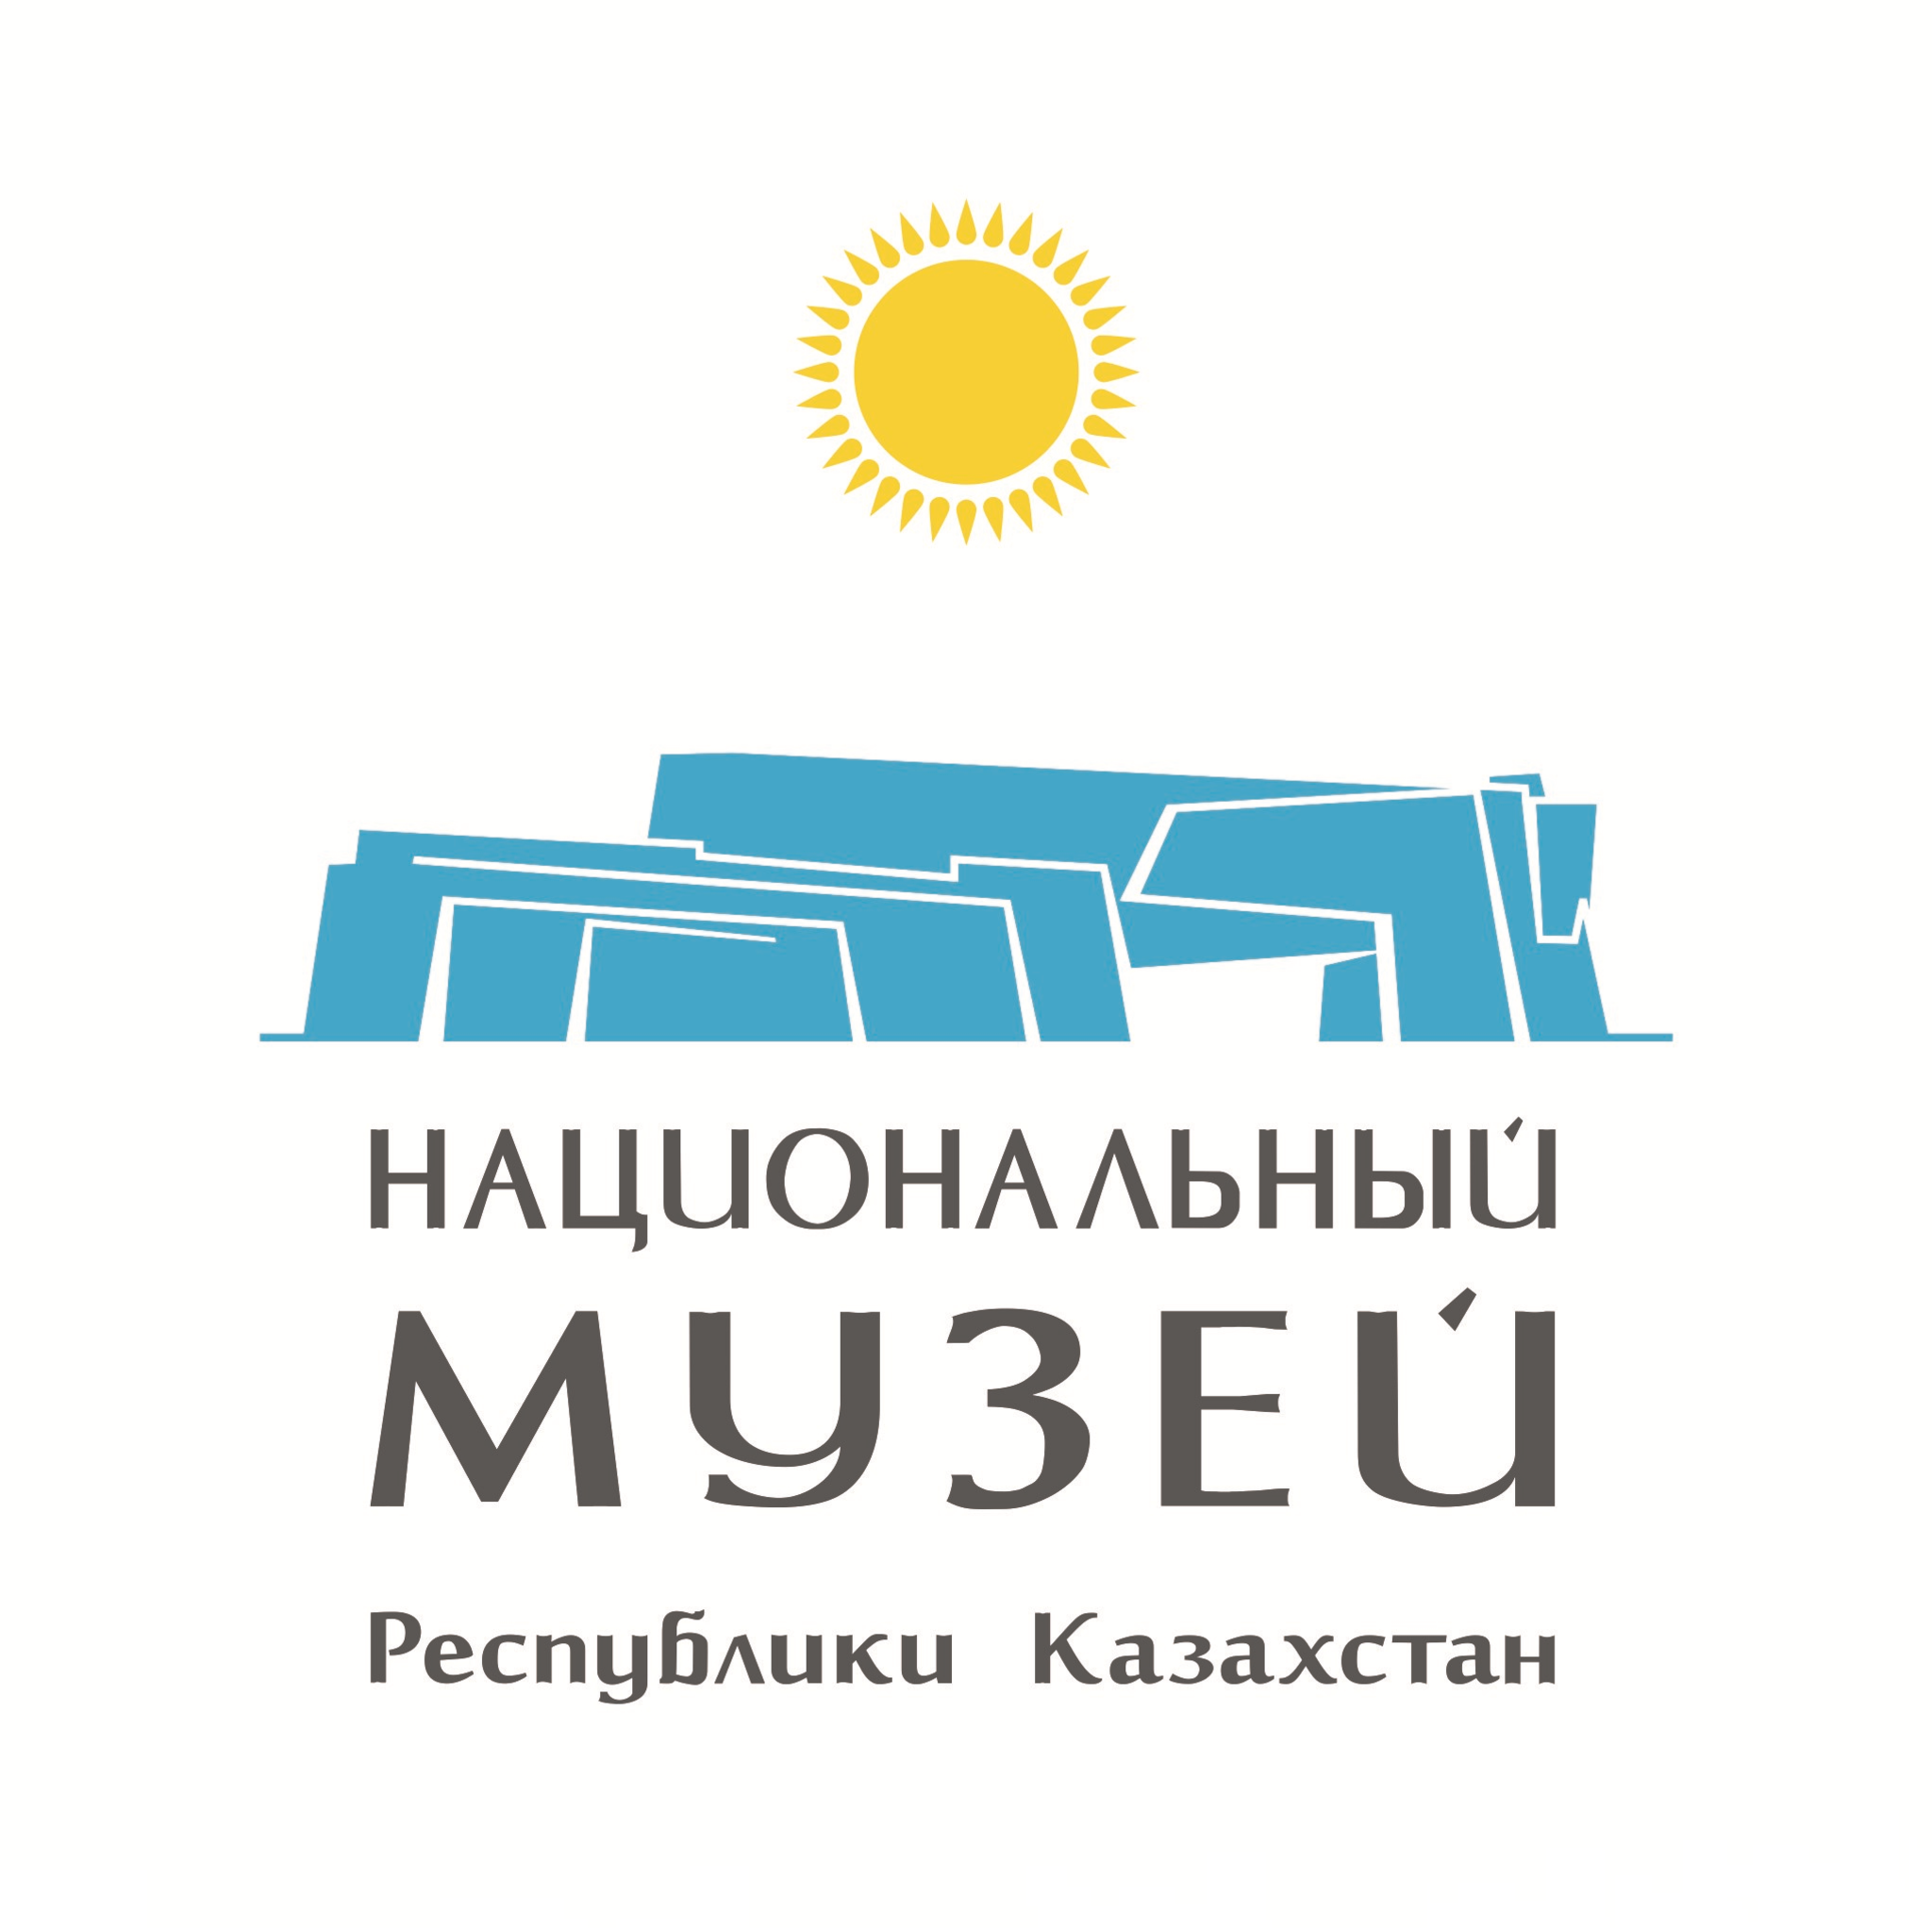 The event dedicated to the 25th anniversary of Independence of Kazakhstan